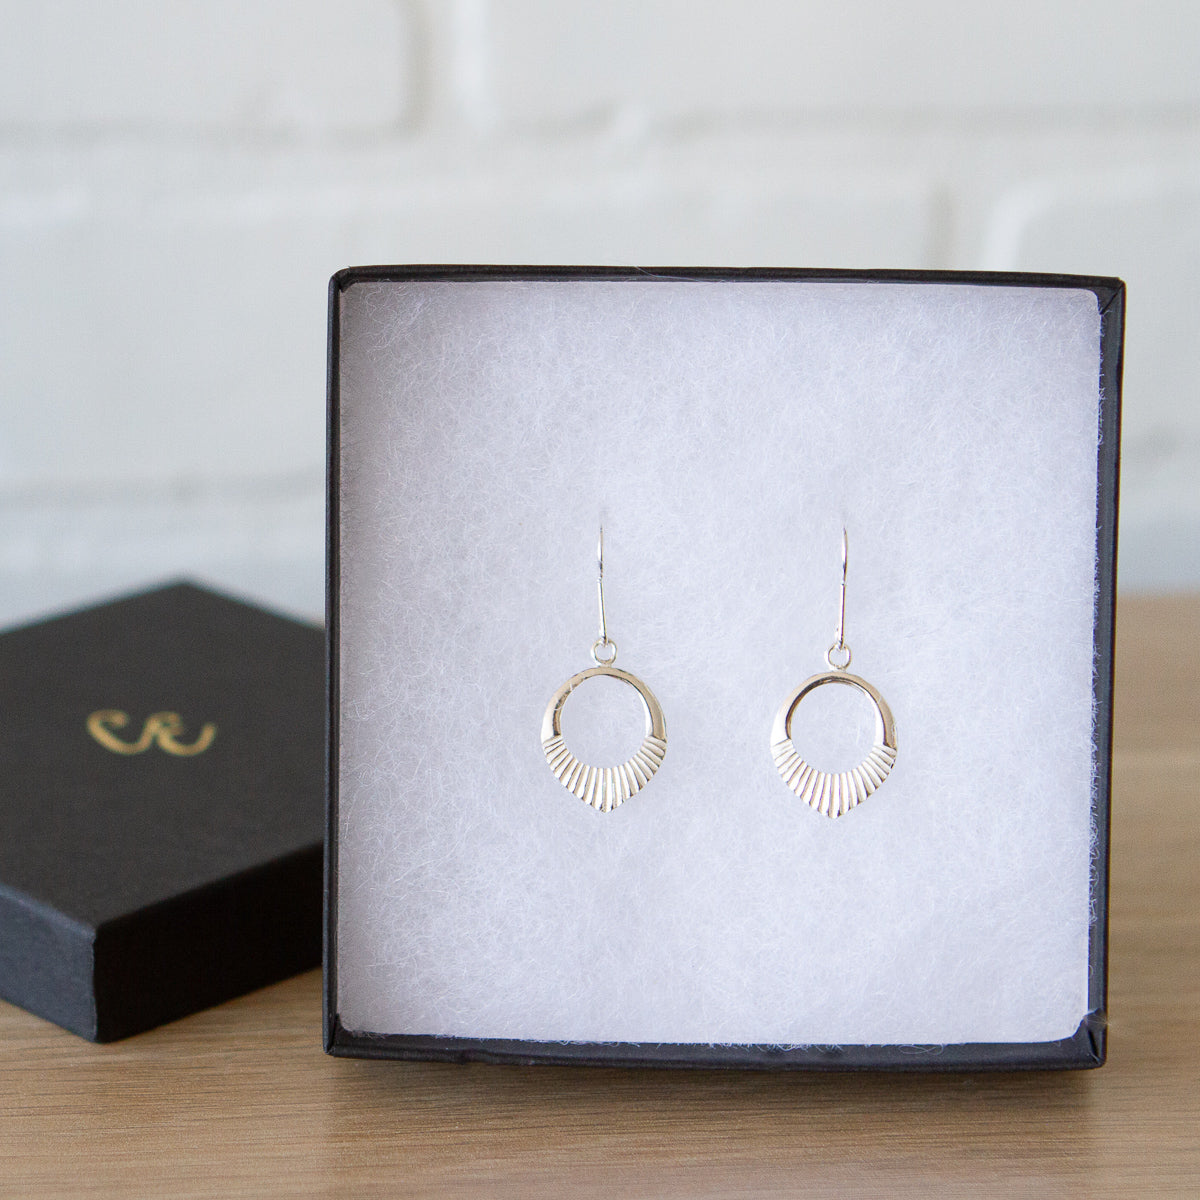 silver small open petal shape earrings with textured bottoms in a gift box